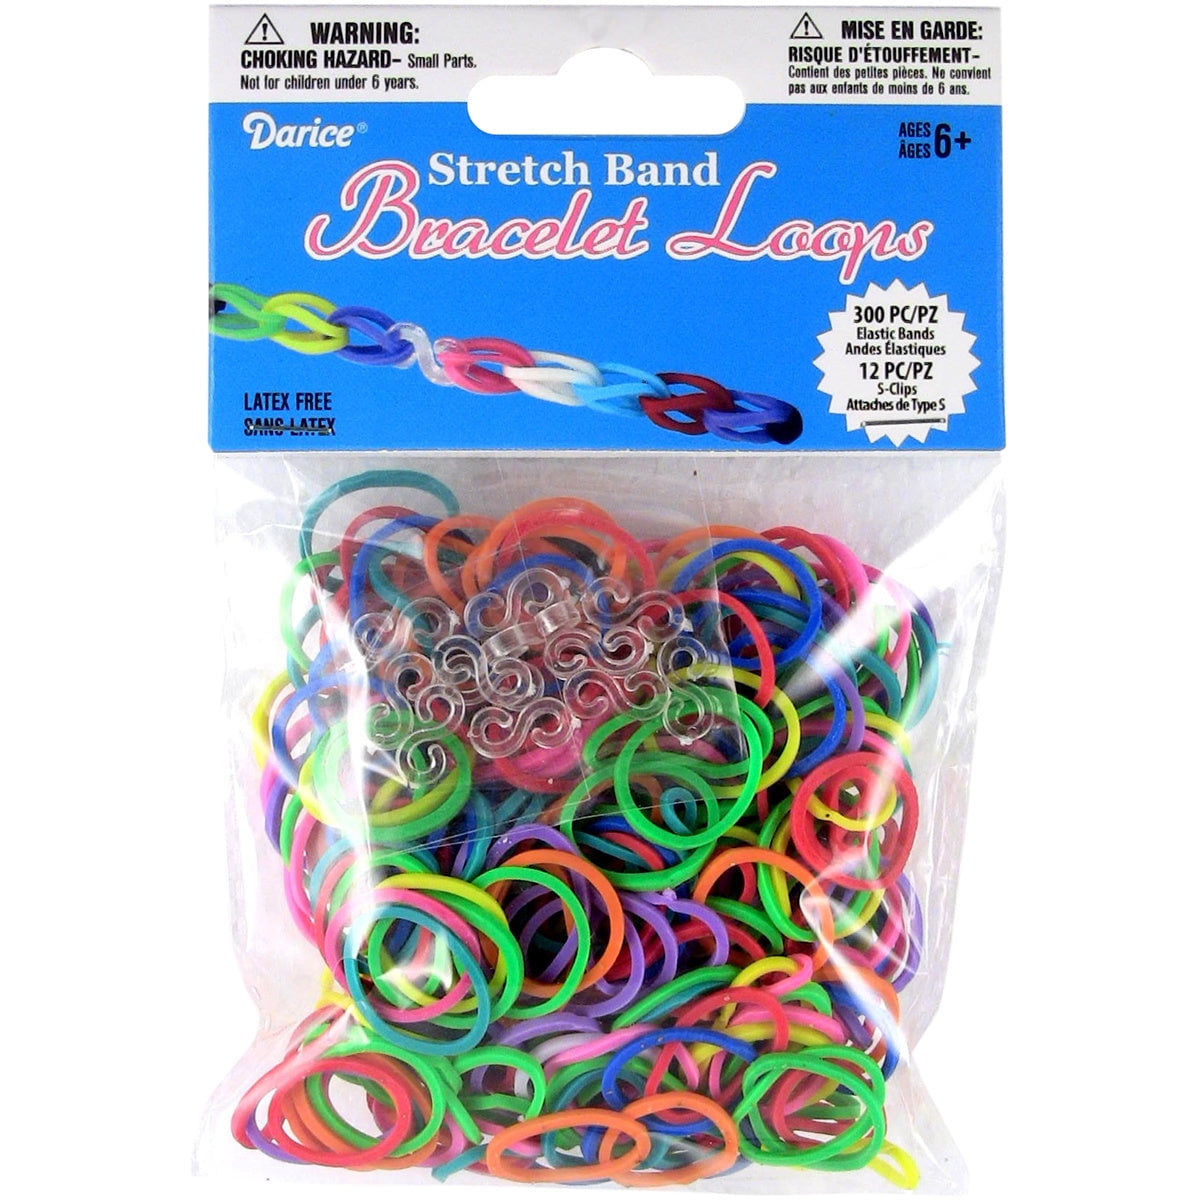 NOGIS 1200pcs S Clips for Rubber Band Bracelets, Colorful and Transparent  Loom Band Clips S Hooks for Loom Bracelets Plastic Loom Bracelet Connectors